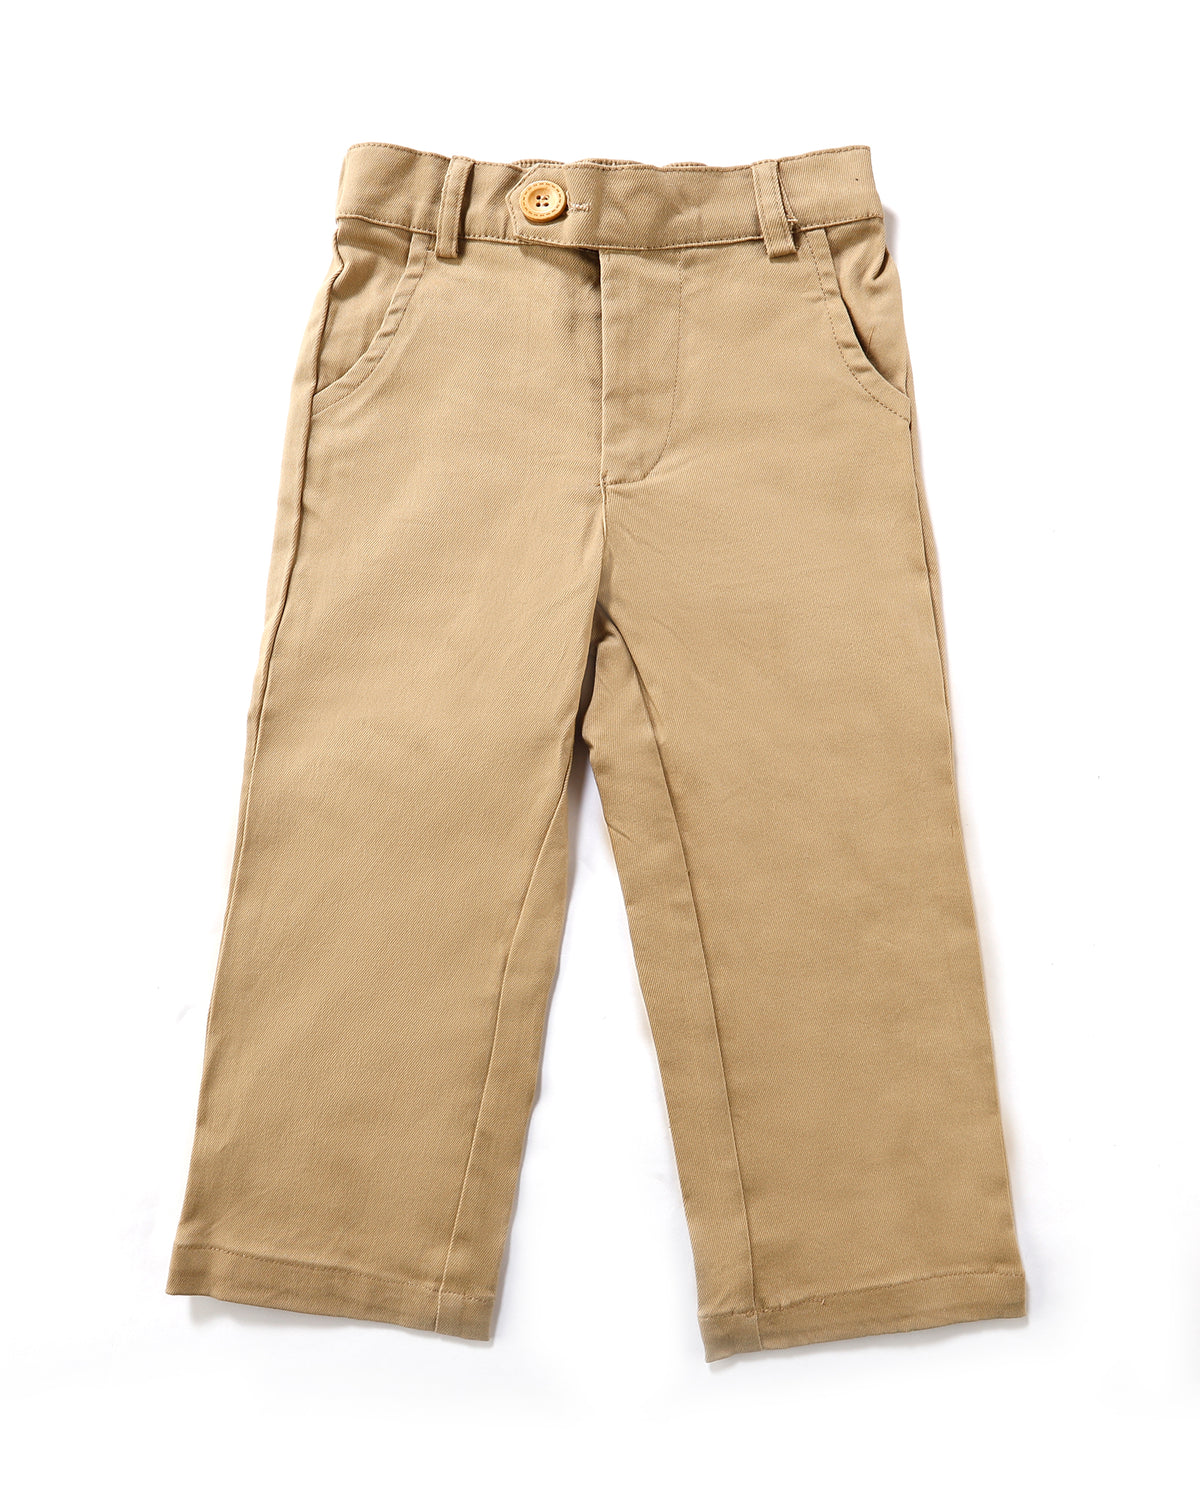 Signature Chino In Tan Front